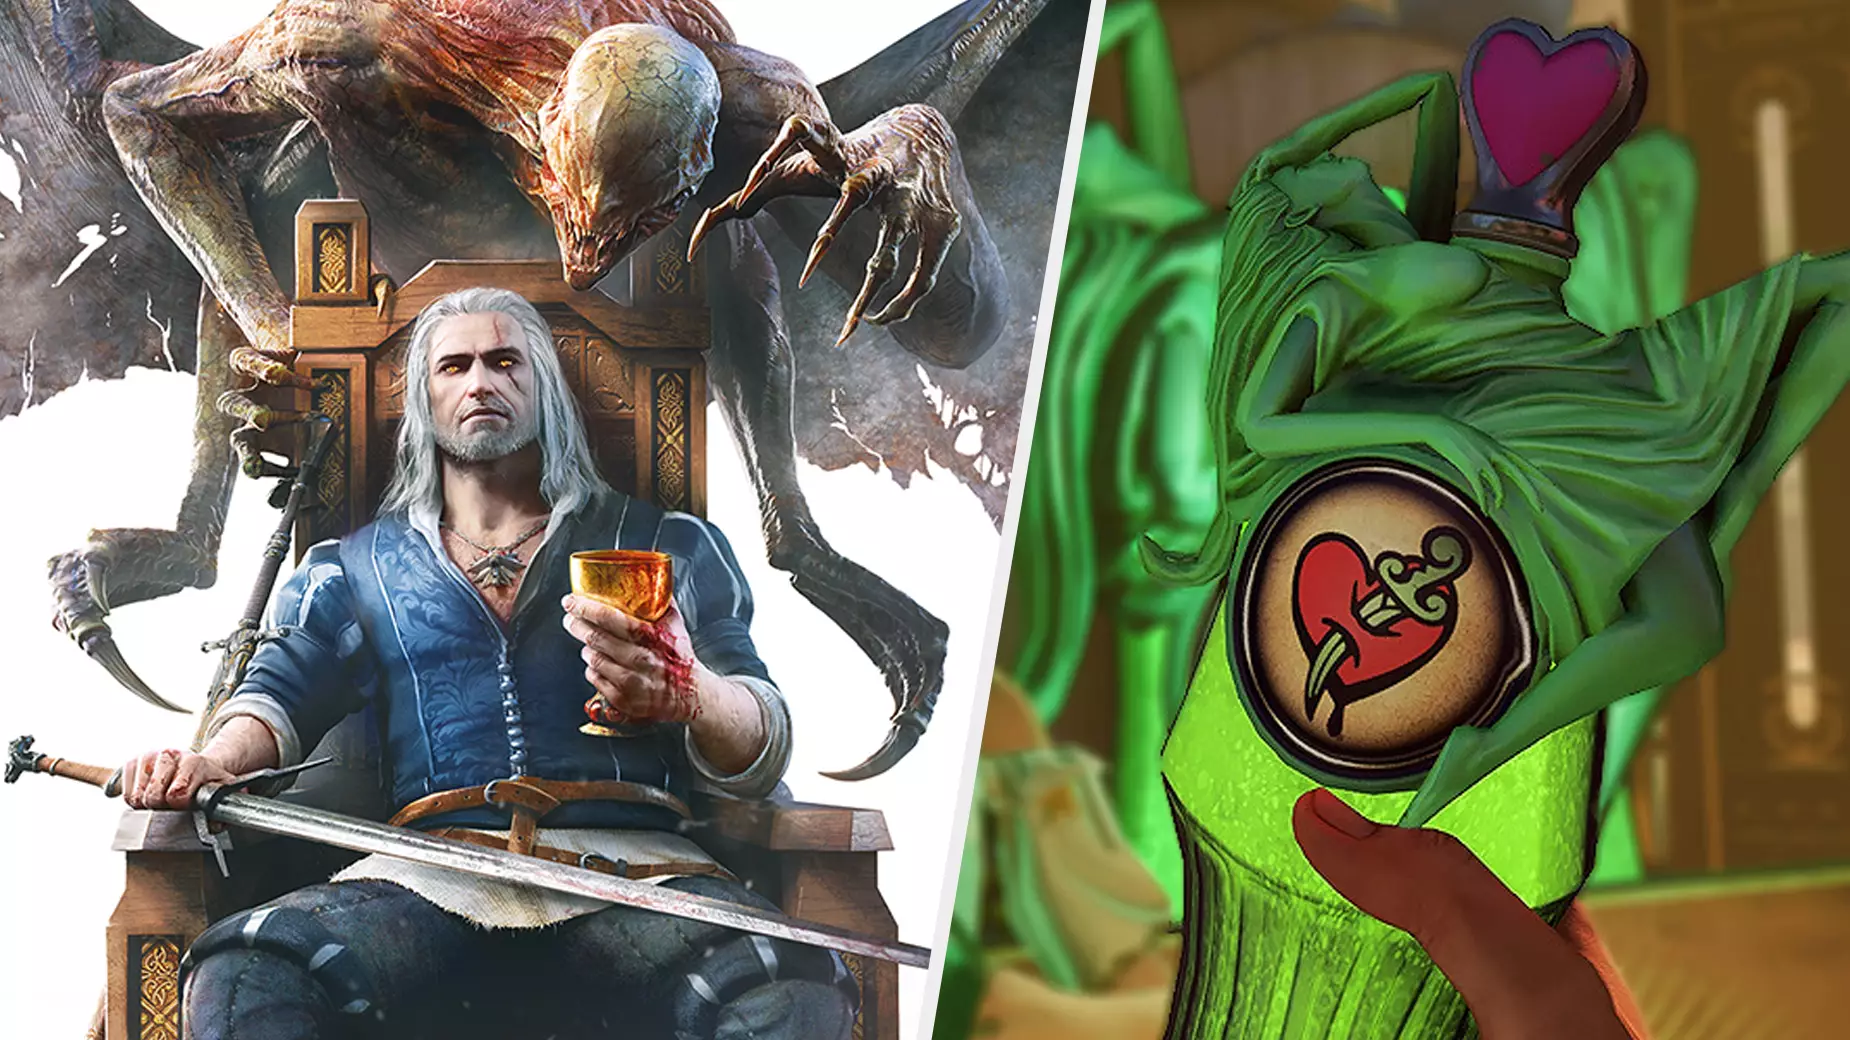 From Pokémon To The Witcher, Check Out These Video Game Themed Cocktails